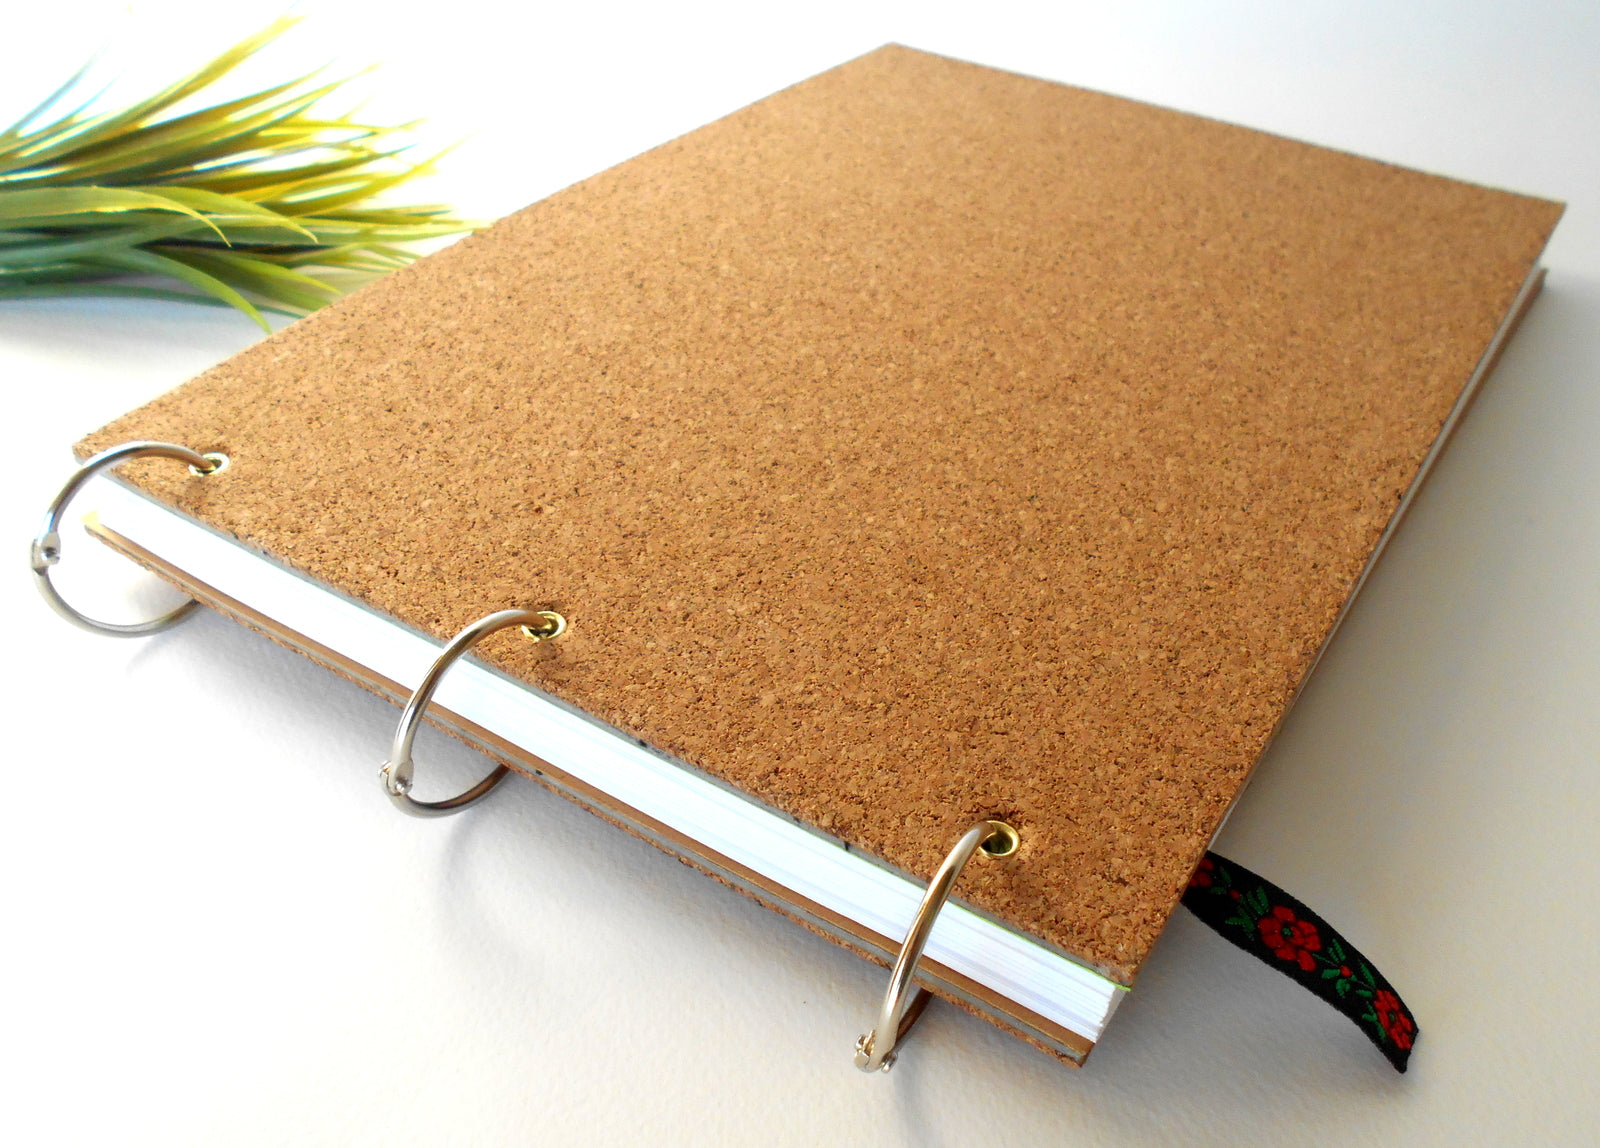 Handmade ravel journal- Cork covers- 100% recycled pages- refillable rustic sketchbooк with a bookmark- handmade diary blank book